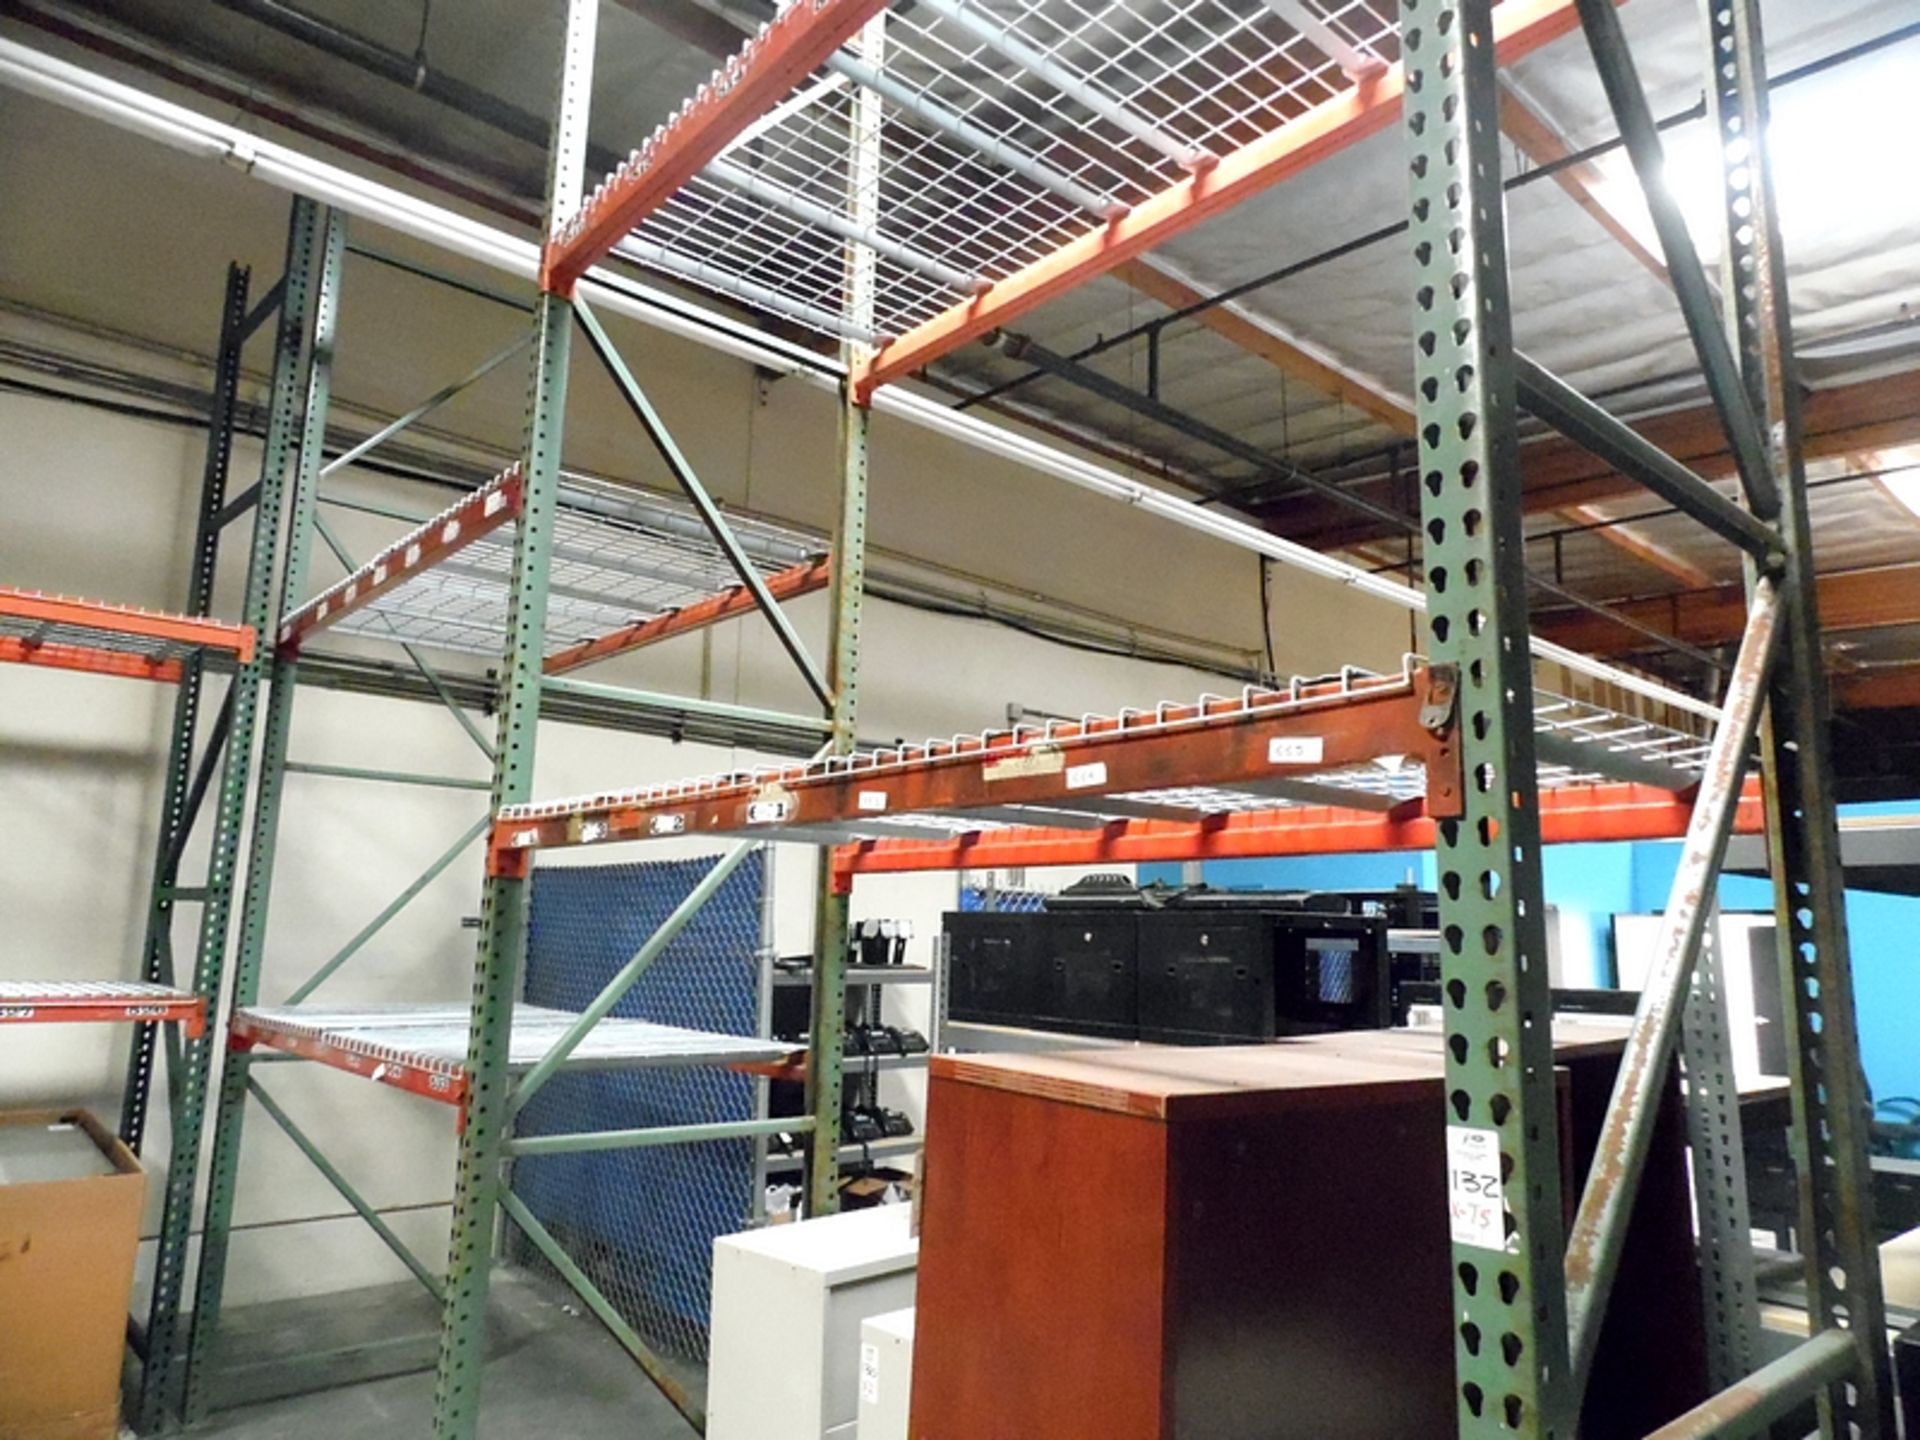 SECTIONS OF PALLET RACKING